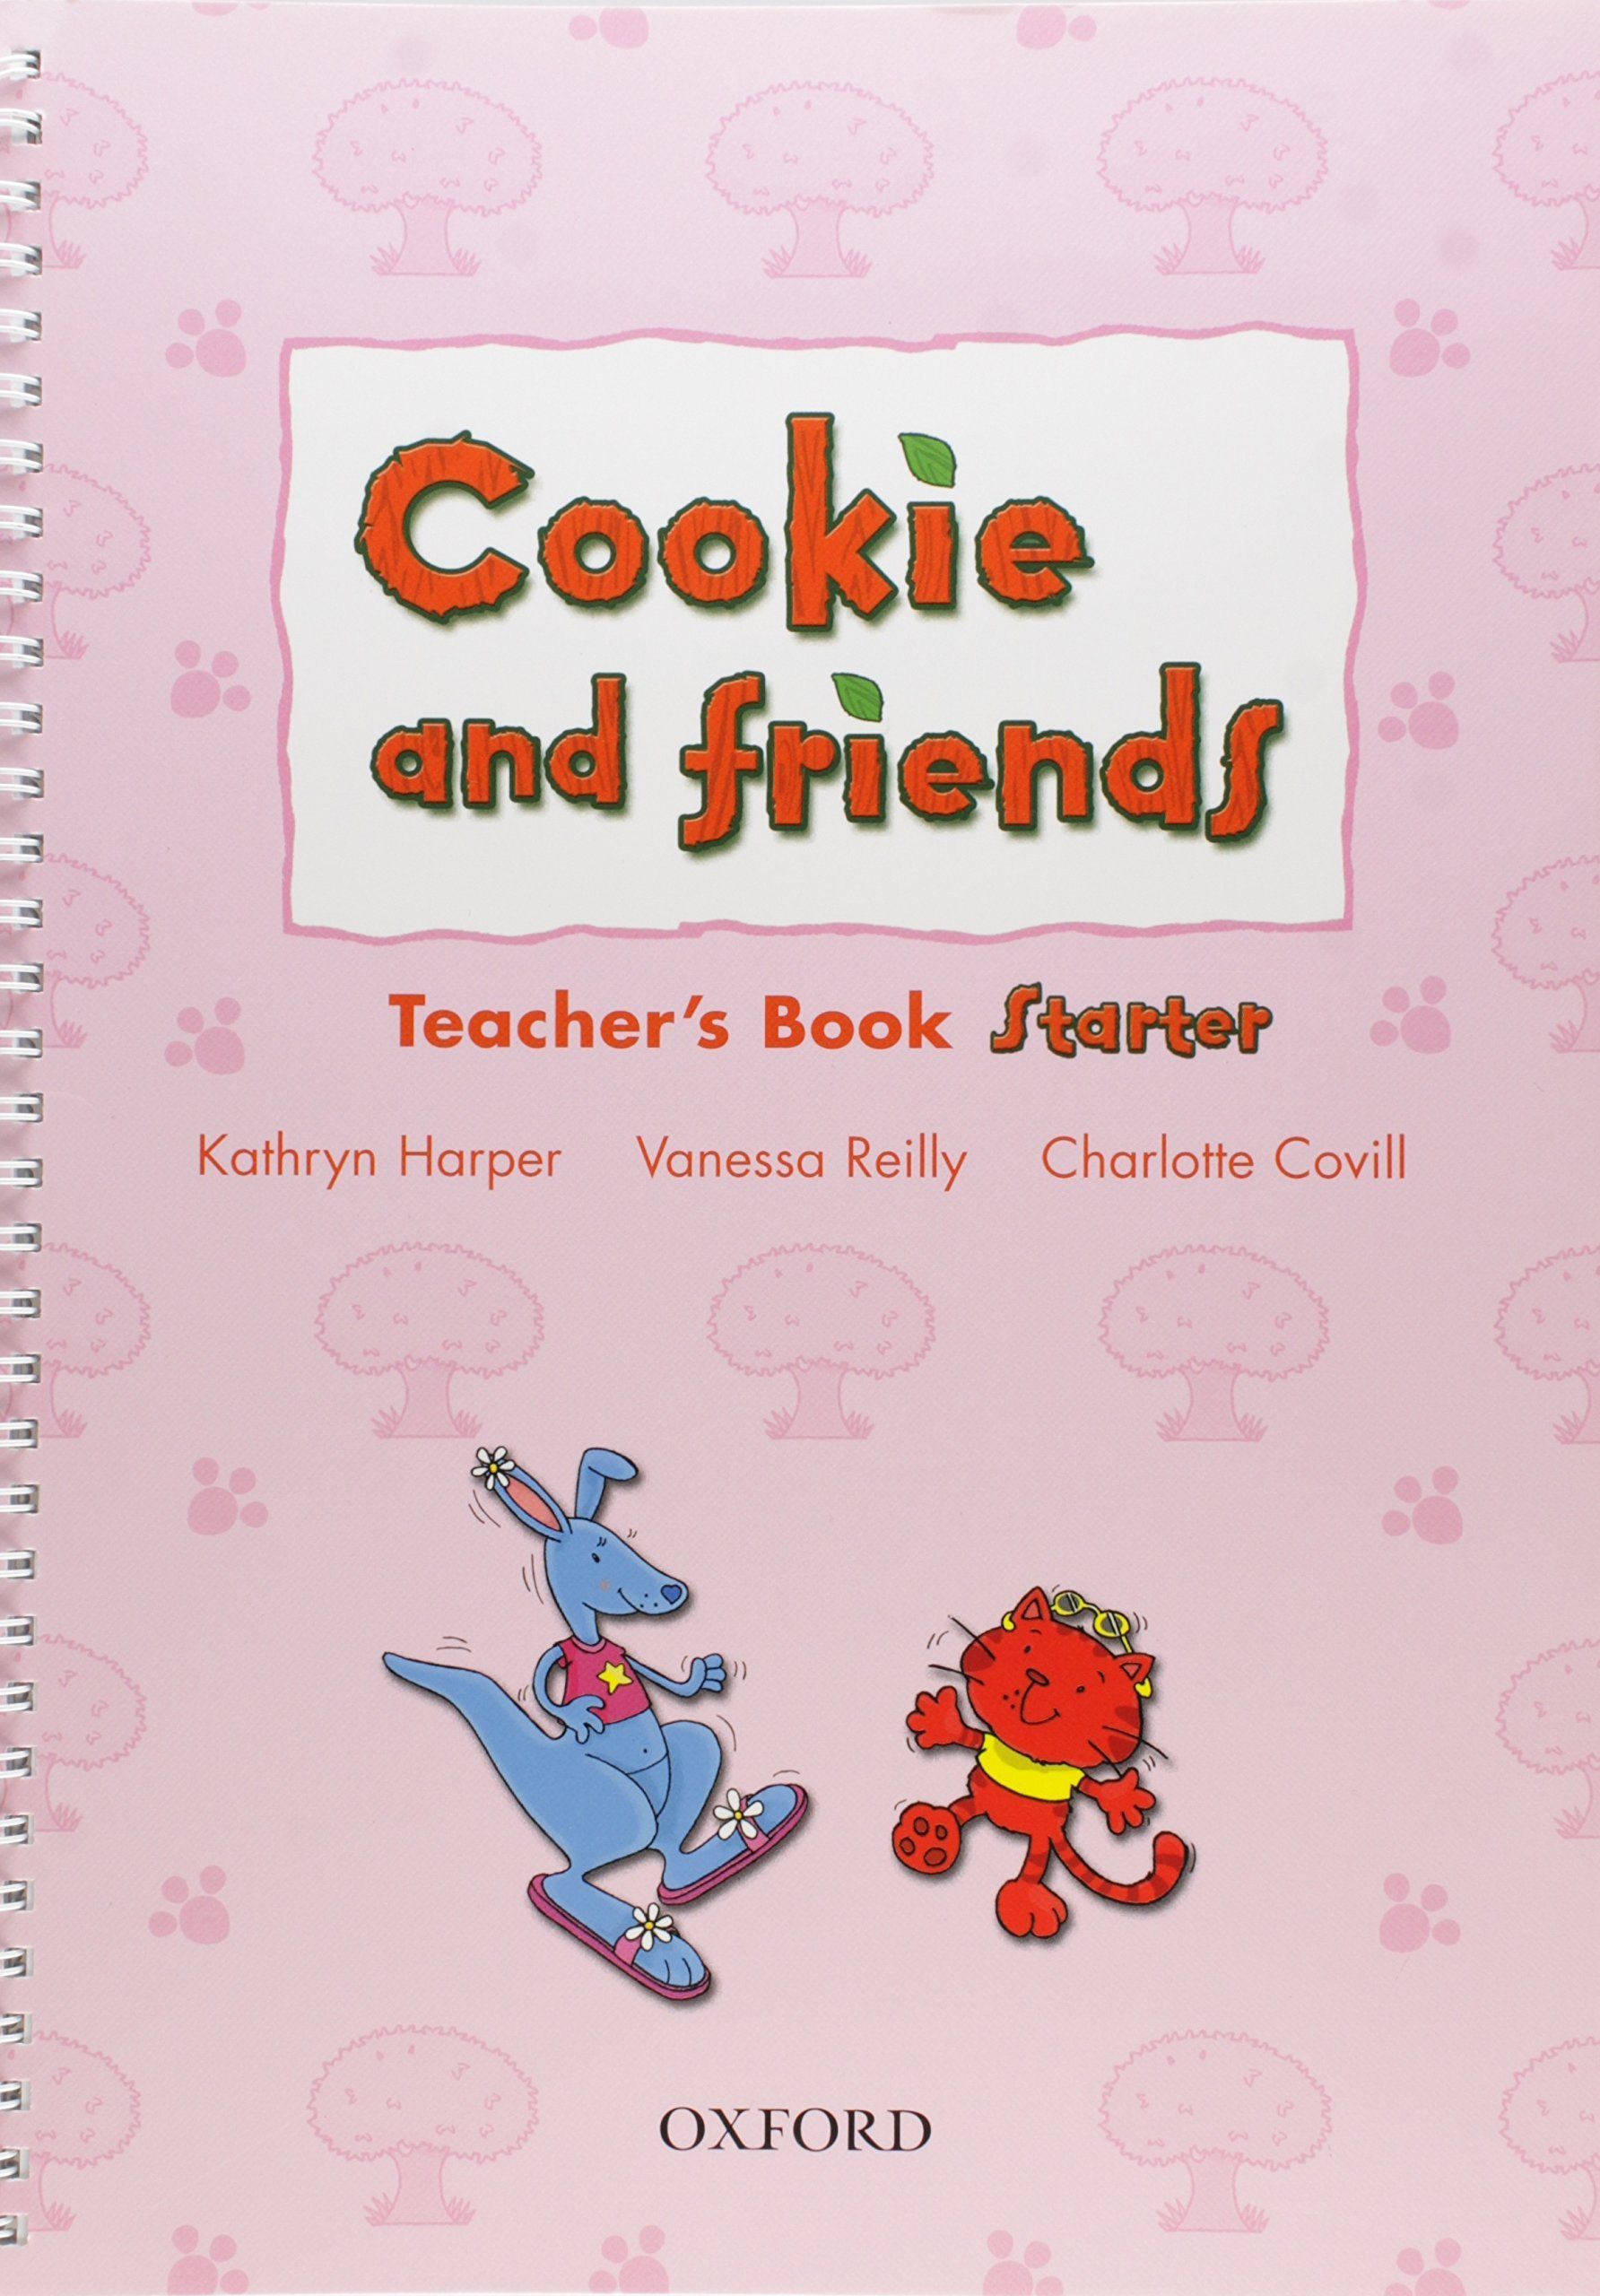 Friends starter book. Книга cookie and friends. Cookie and friends Starter. Cookie and friends Oxford. Cookie and friends a teachers book.